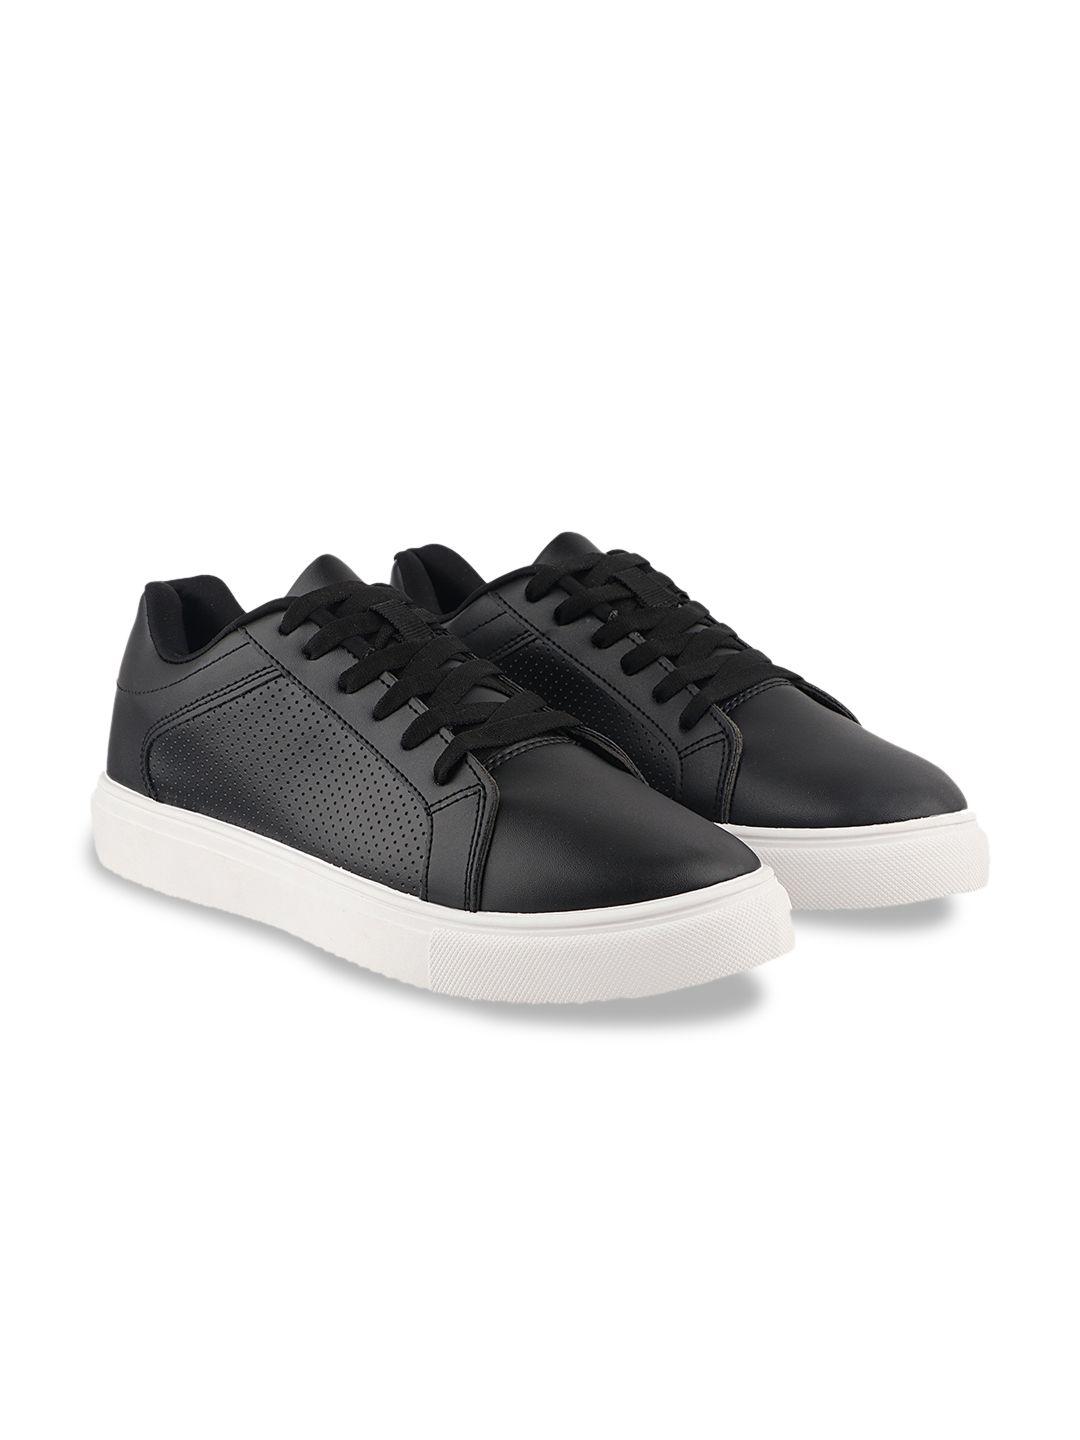 The Roadster Lifestyle Co Men Regular Sneakers